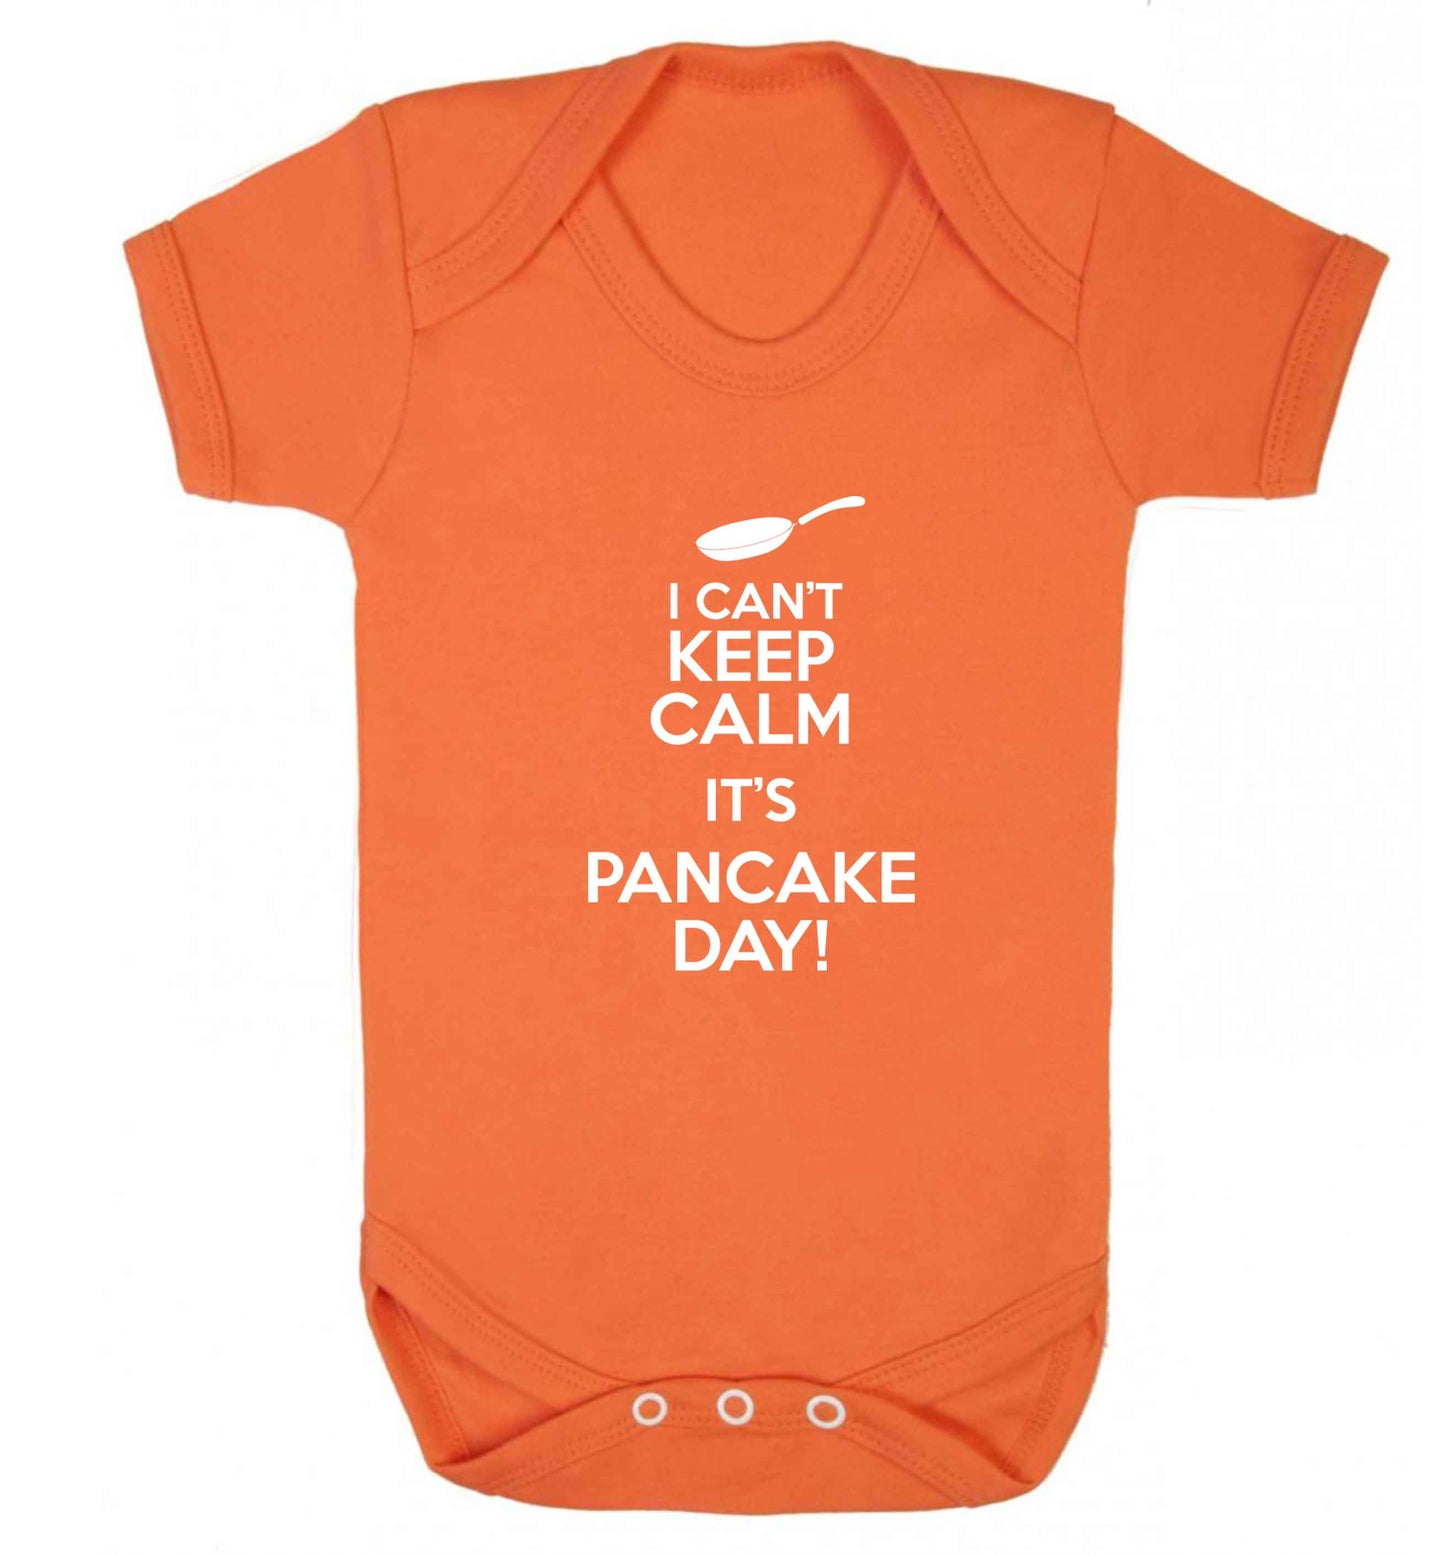 I can't keep calm it's pancake day! baby vest orange 18-24 months